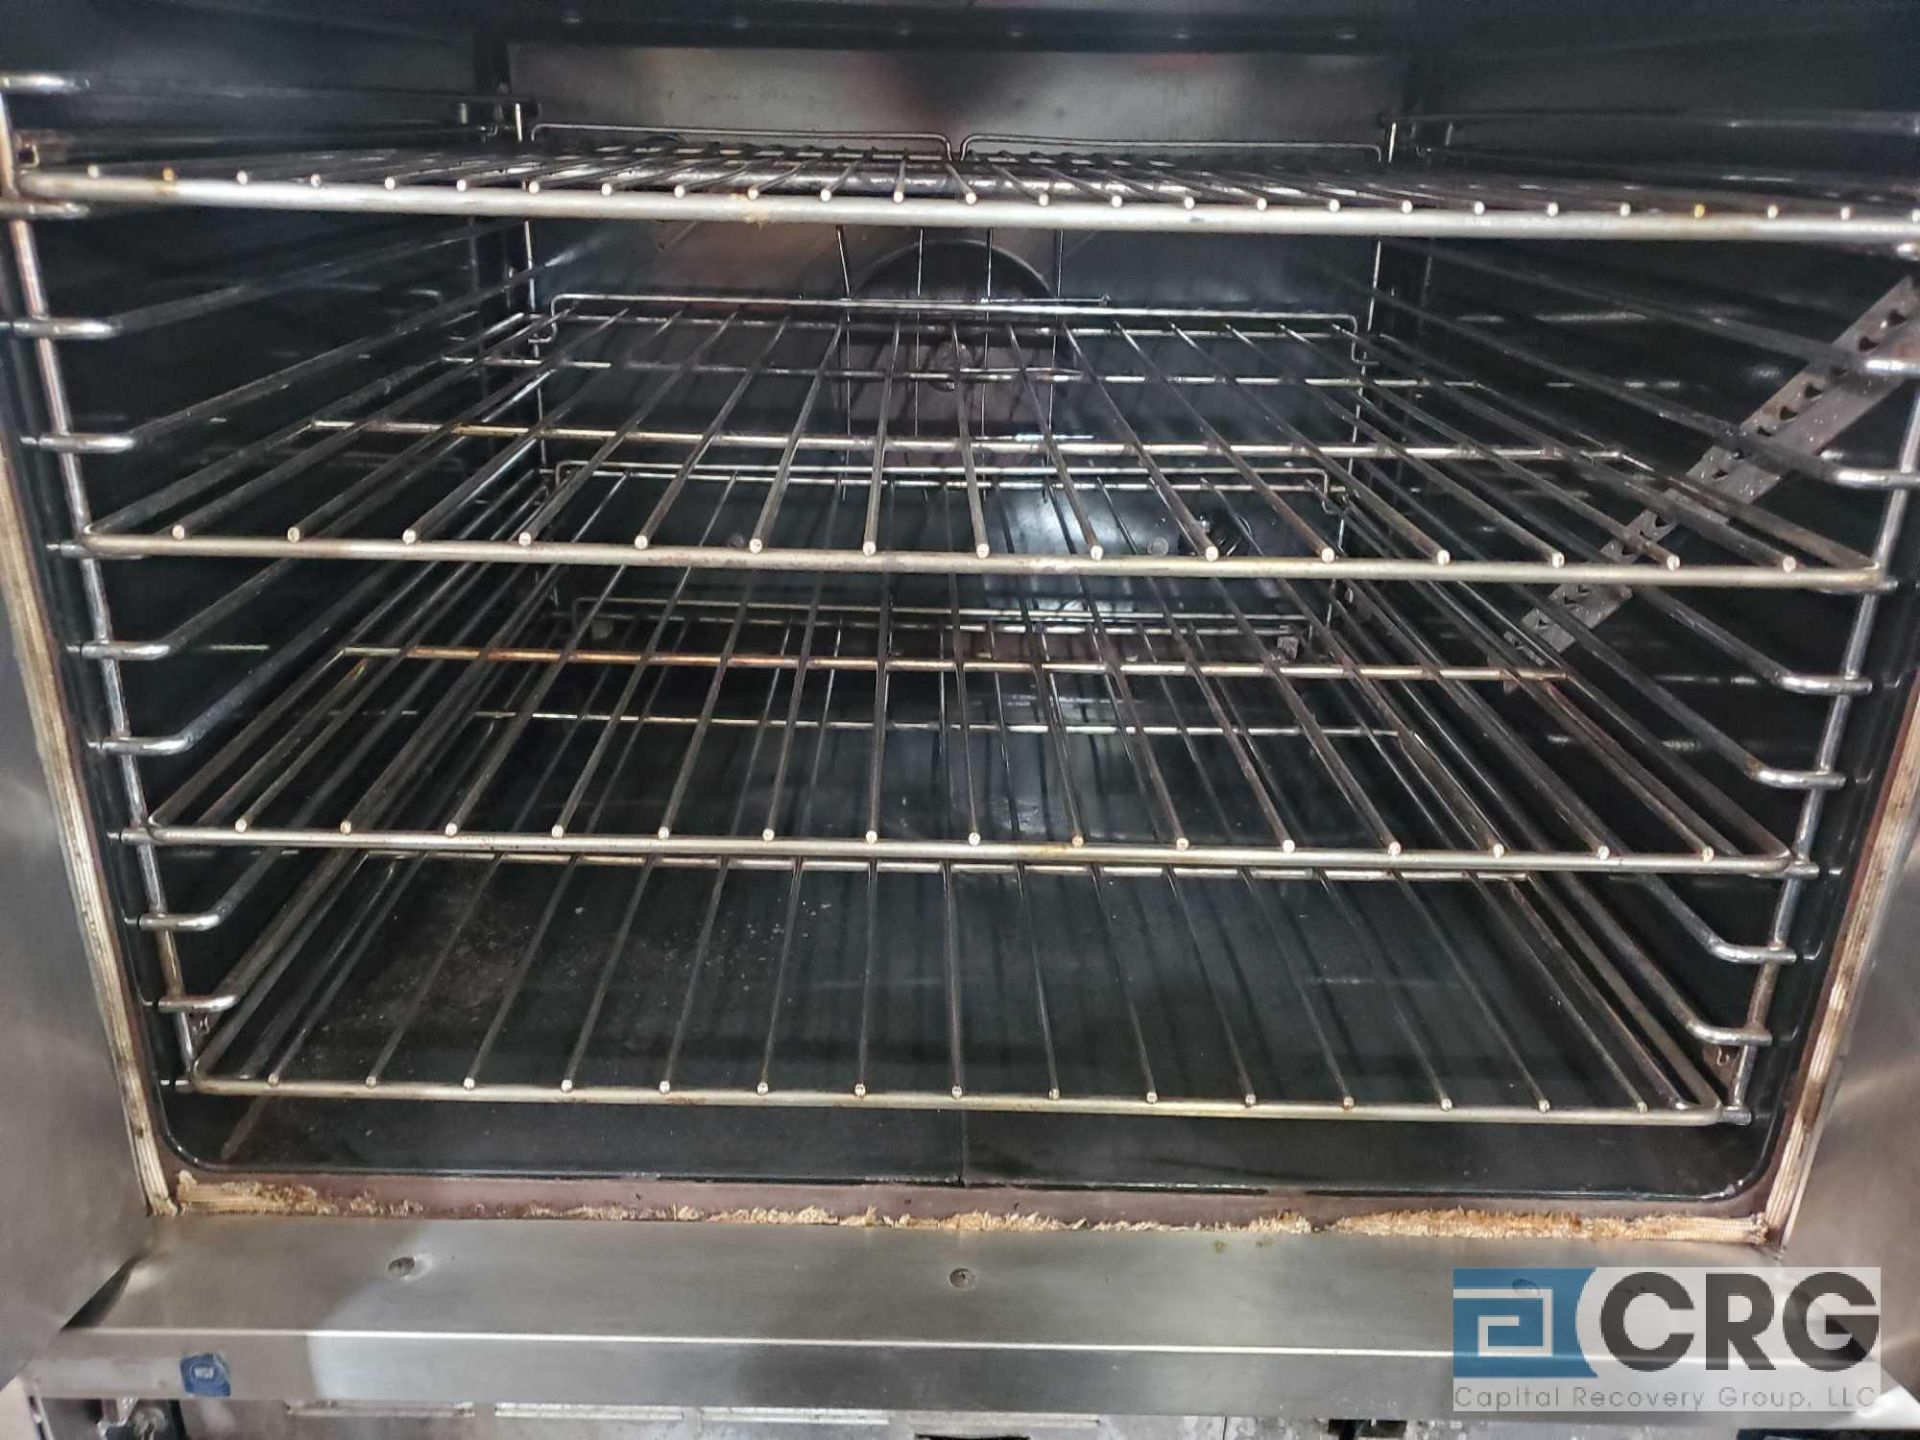 Single Electric Convection Oven - Image 3 of 3